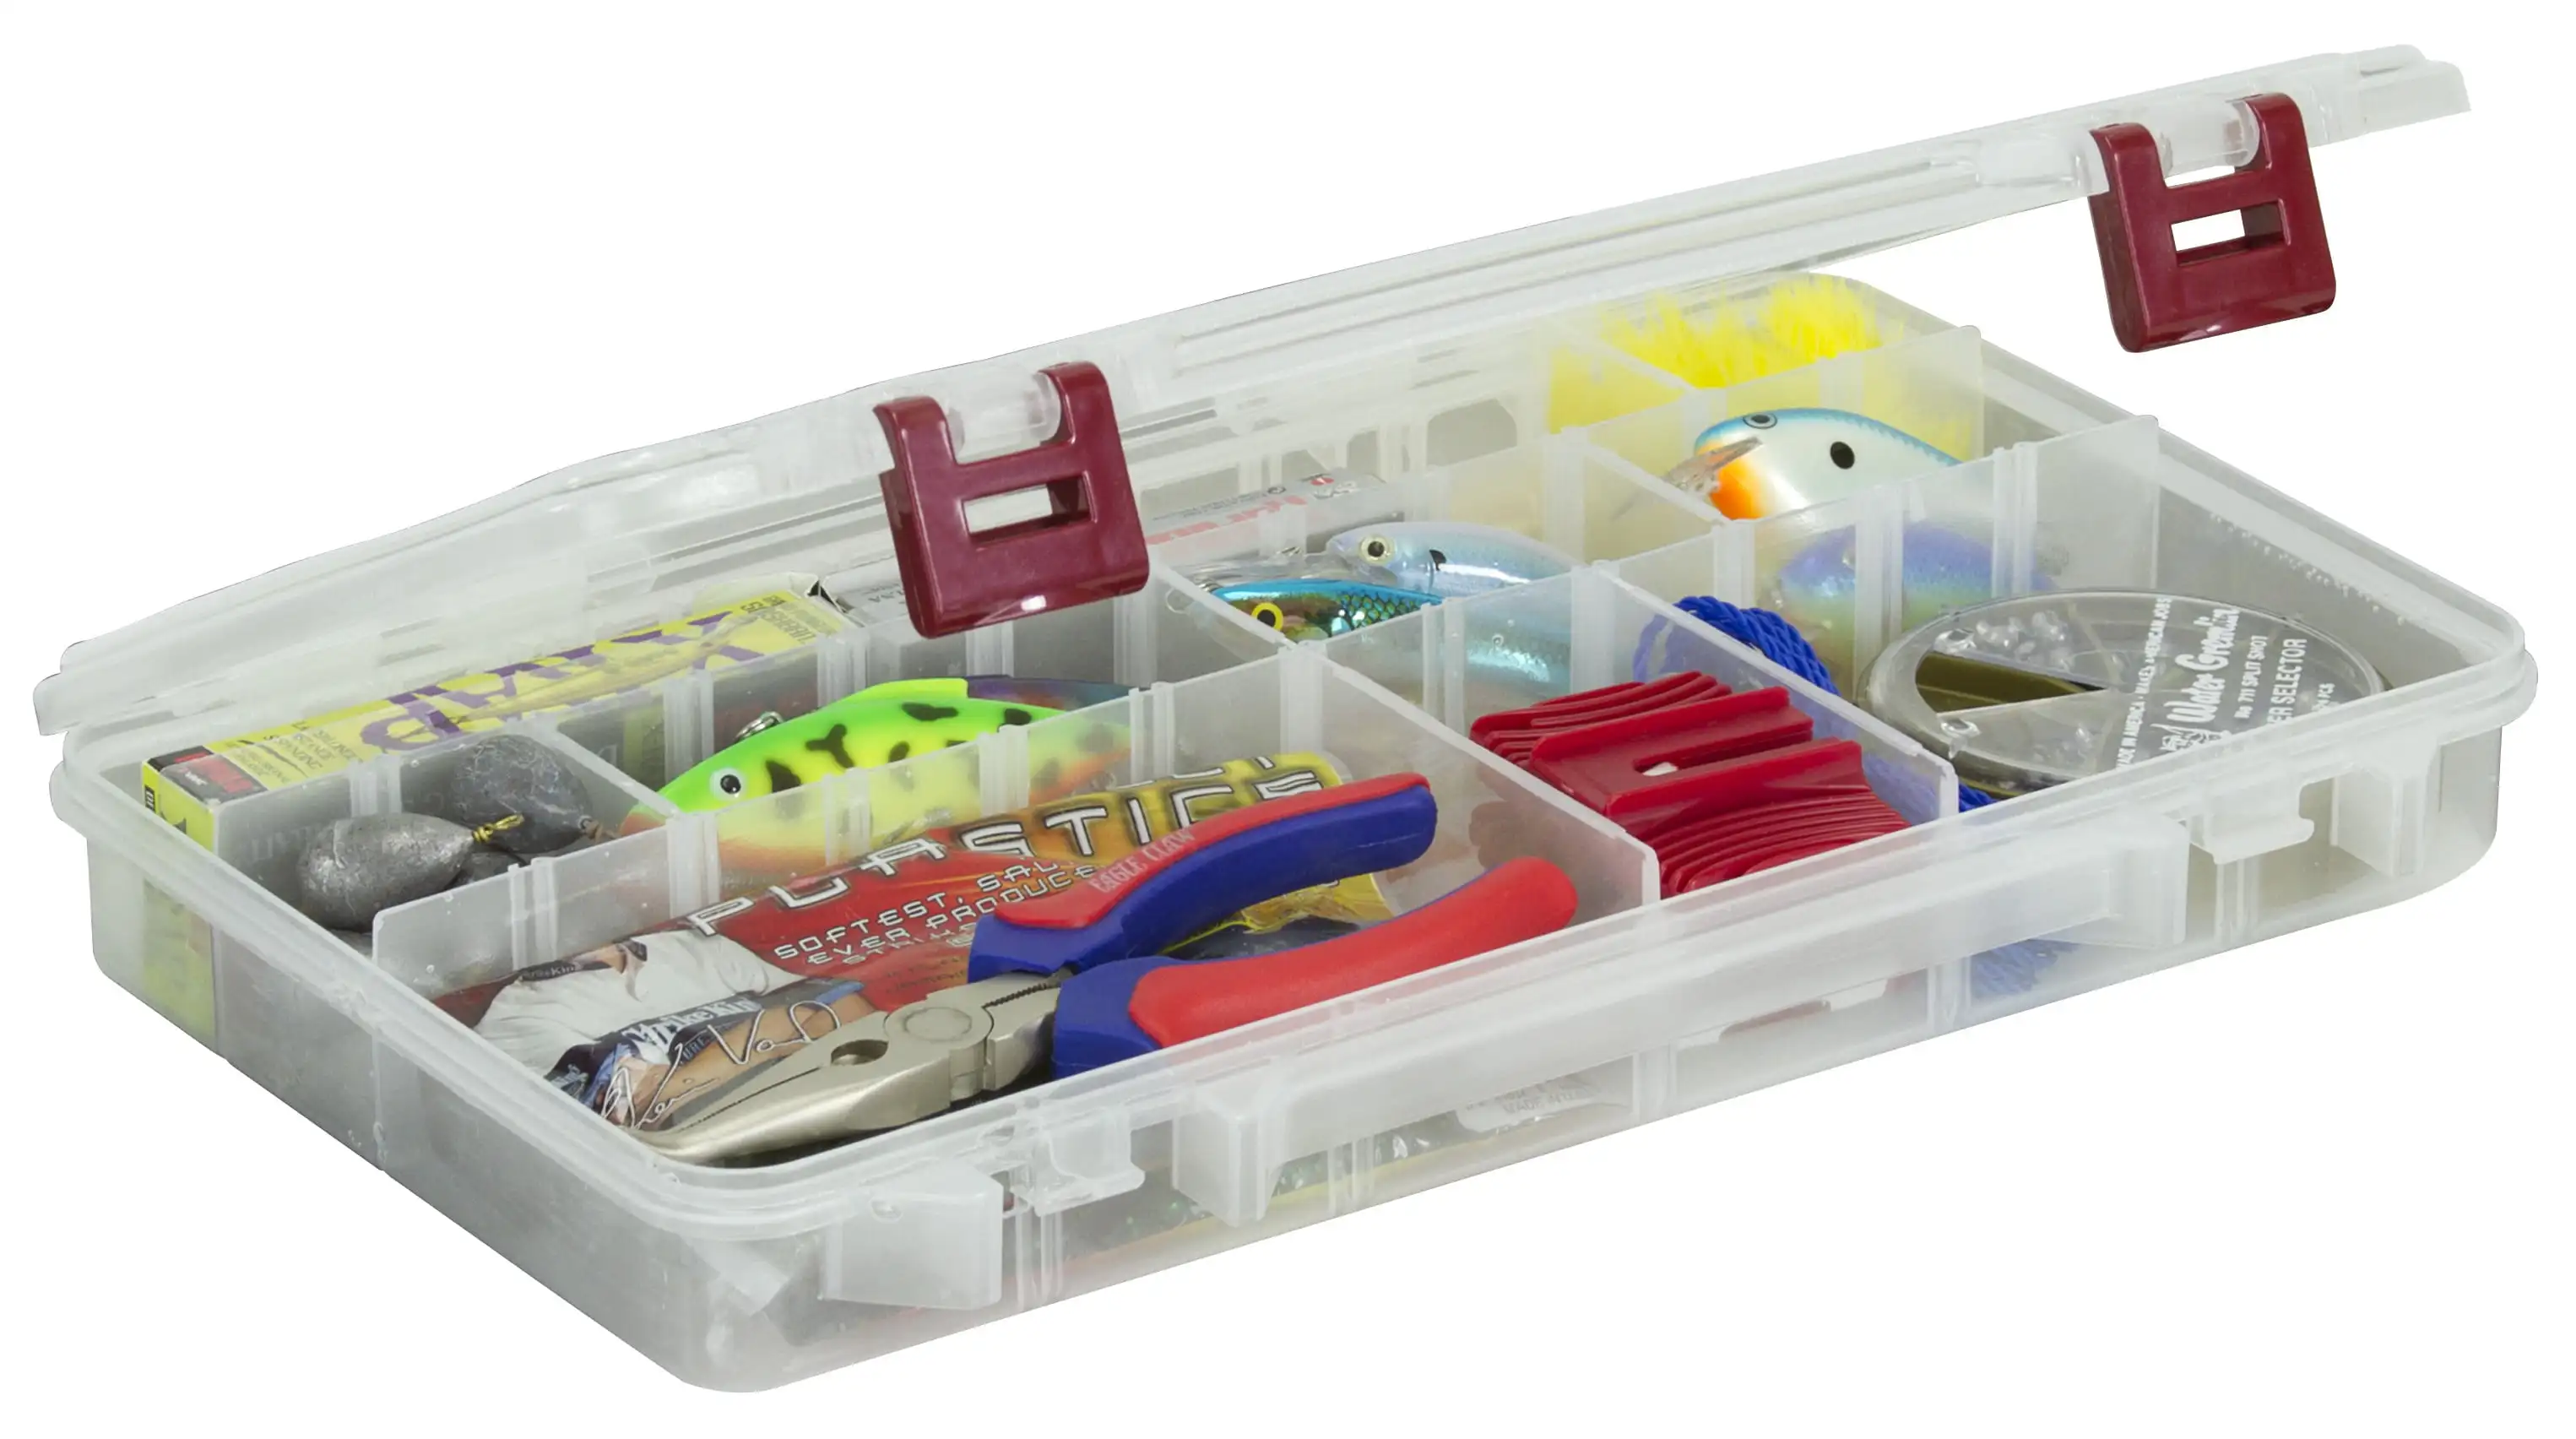 

Set of 4 - ProLatch Stowaway Large 3700 Clear Organizer Tackle Box, Large, Clear